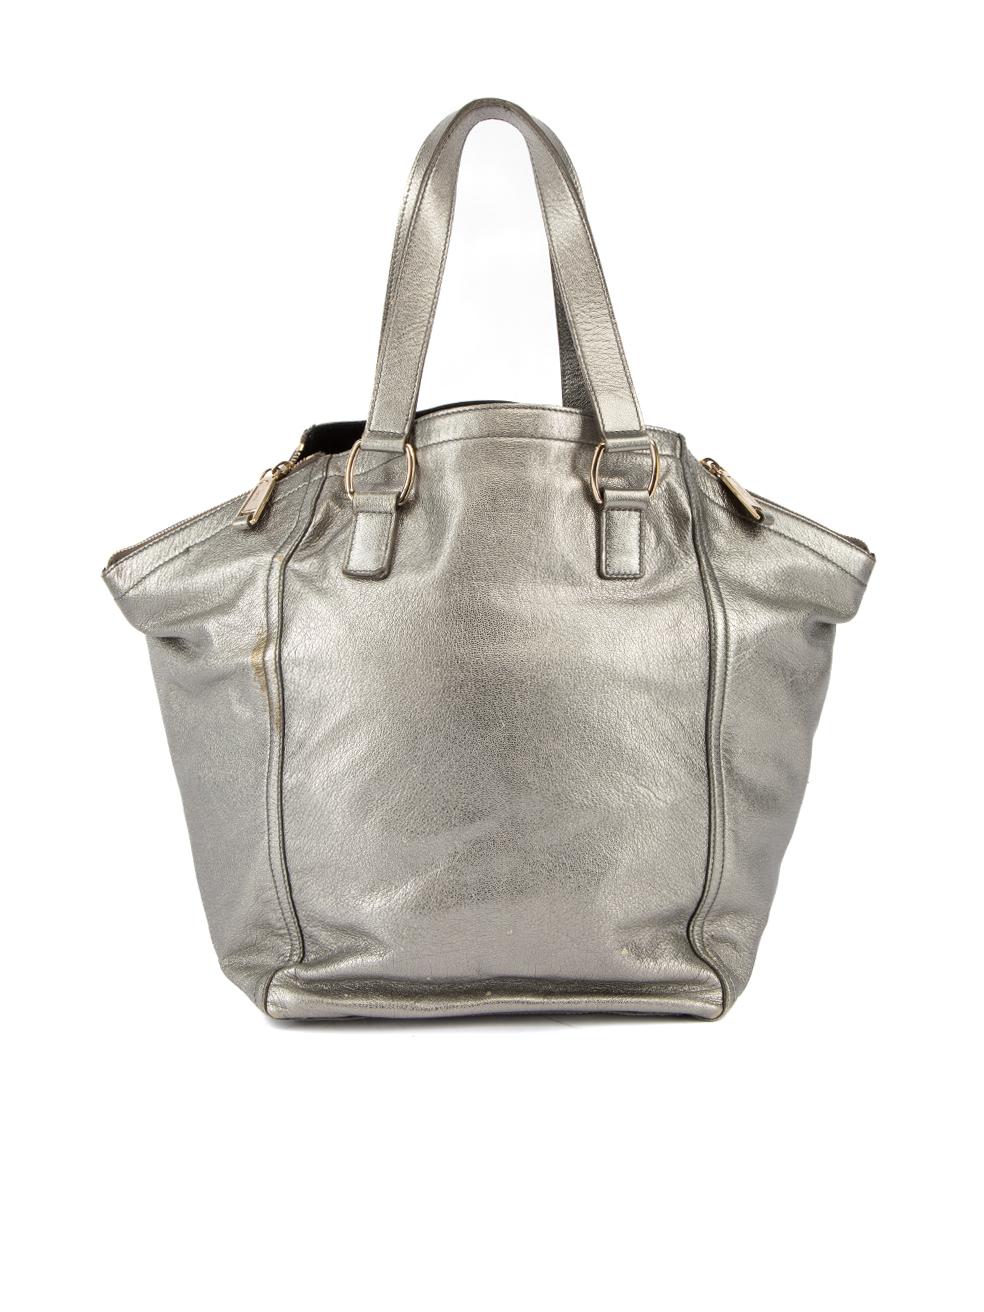 Pre-Loved Yves Saint Laurent Rive Gauche Women's Silver Metallic Leather Downtow In Excellent Condition In London, GB